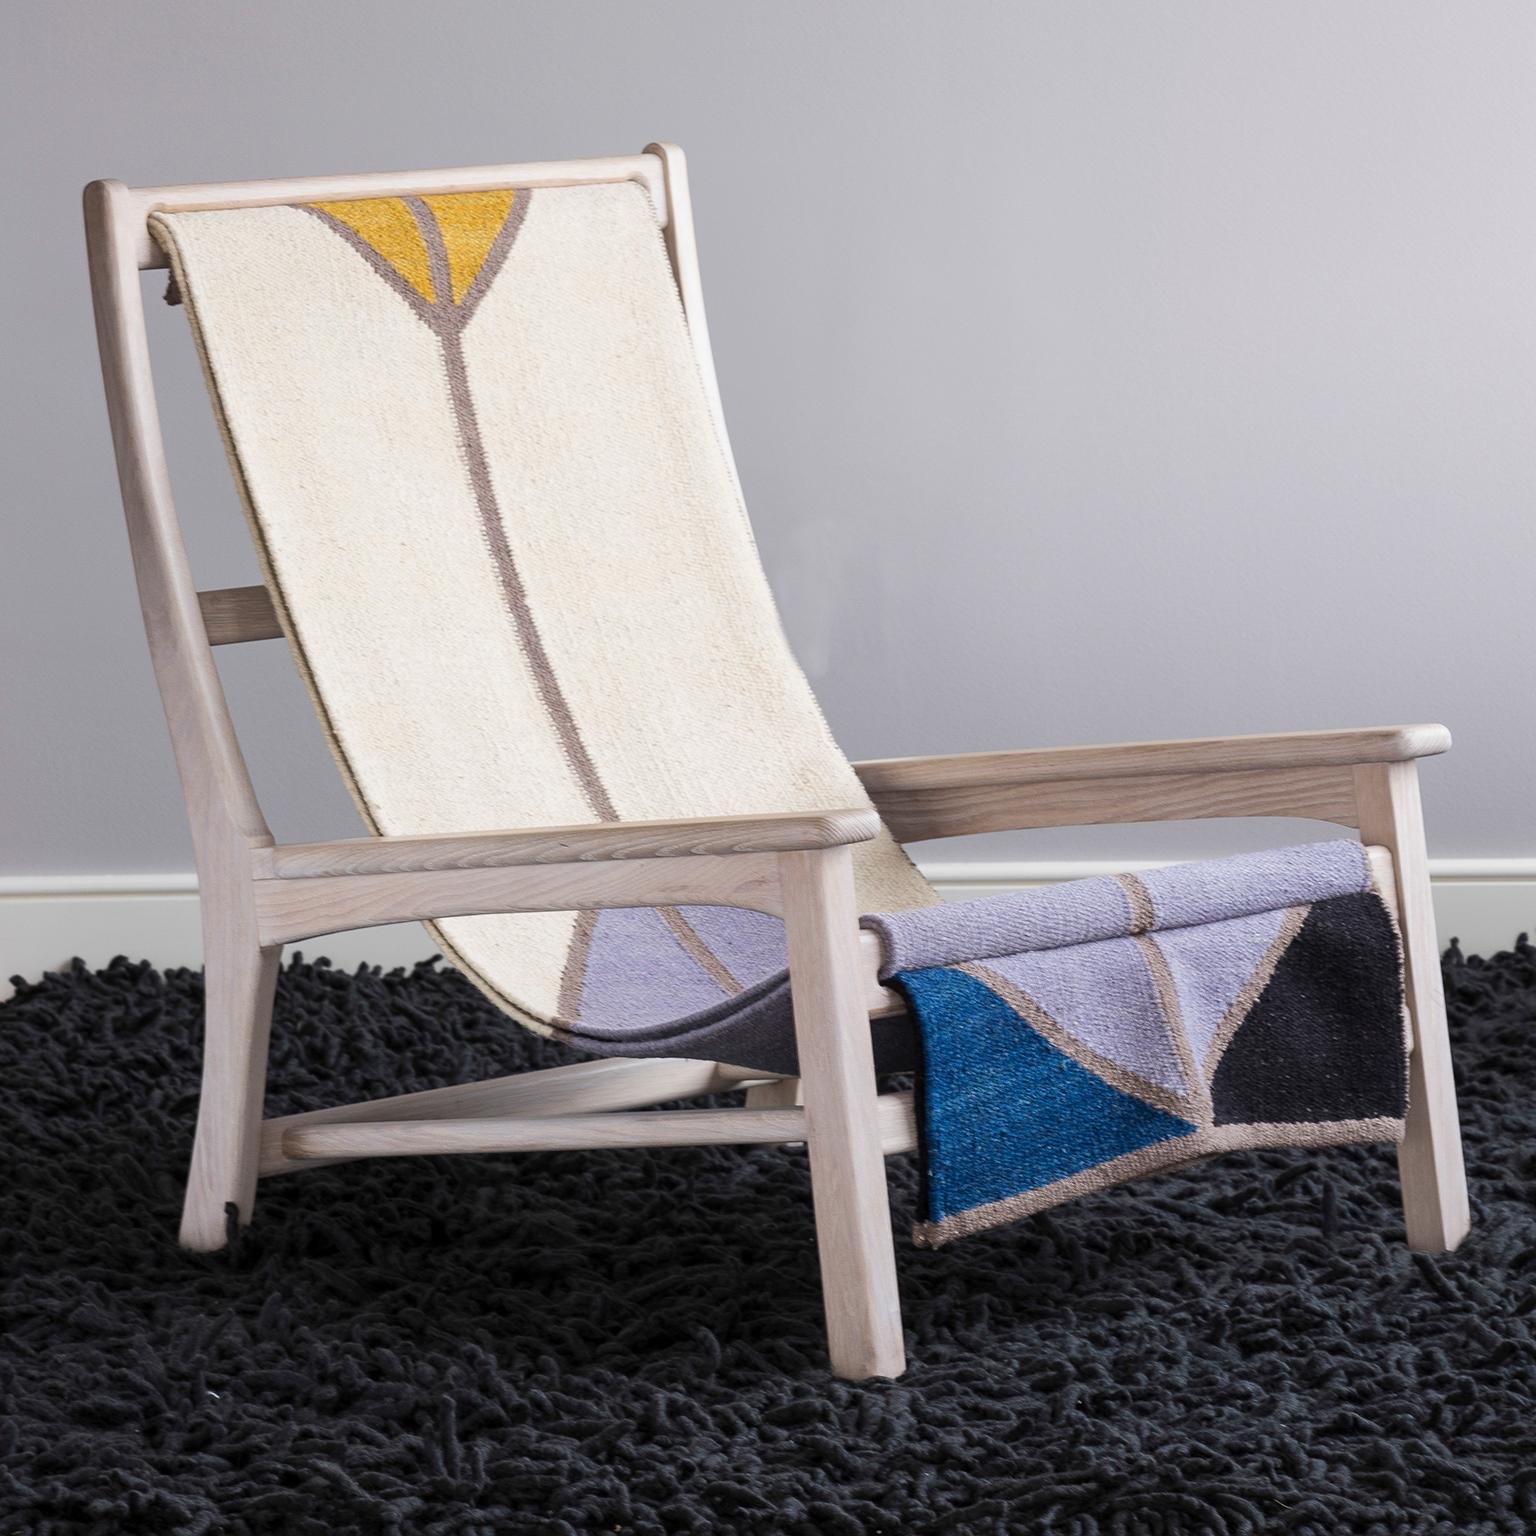 Ash lounge chair with gray stain, woven wool rug sling seat. Available in oak, and other finishes as well